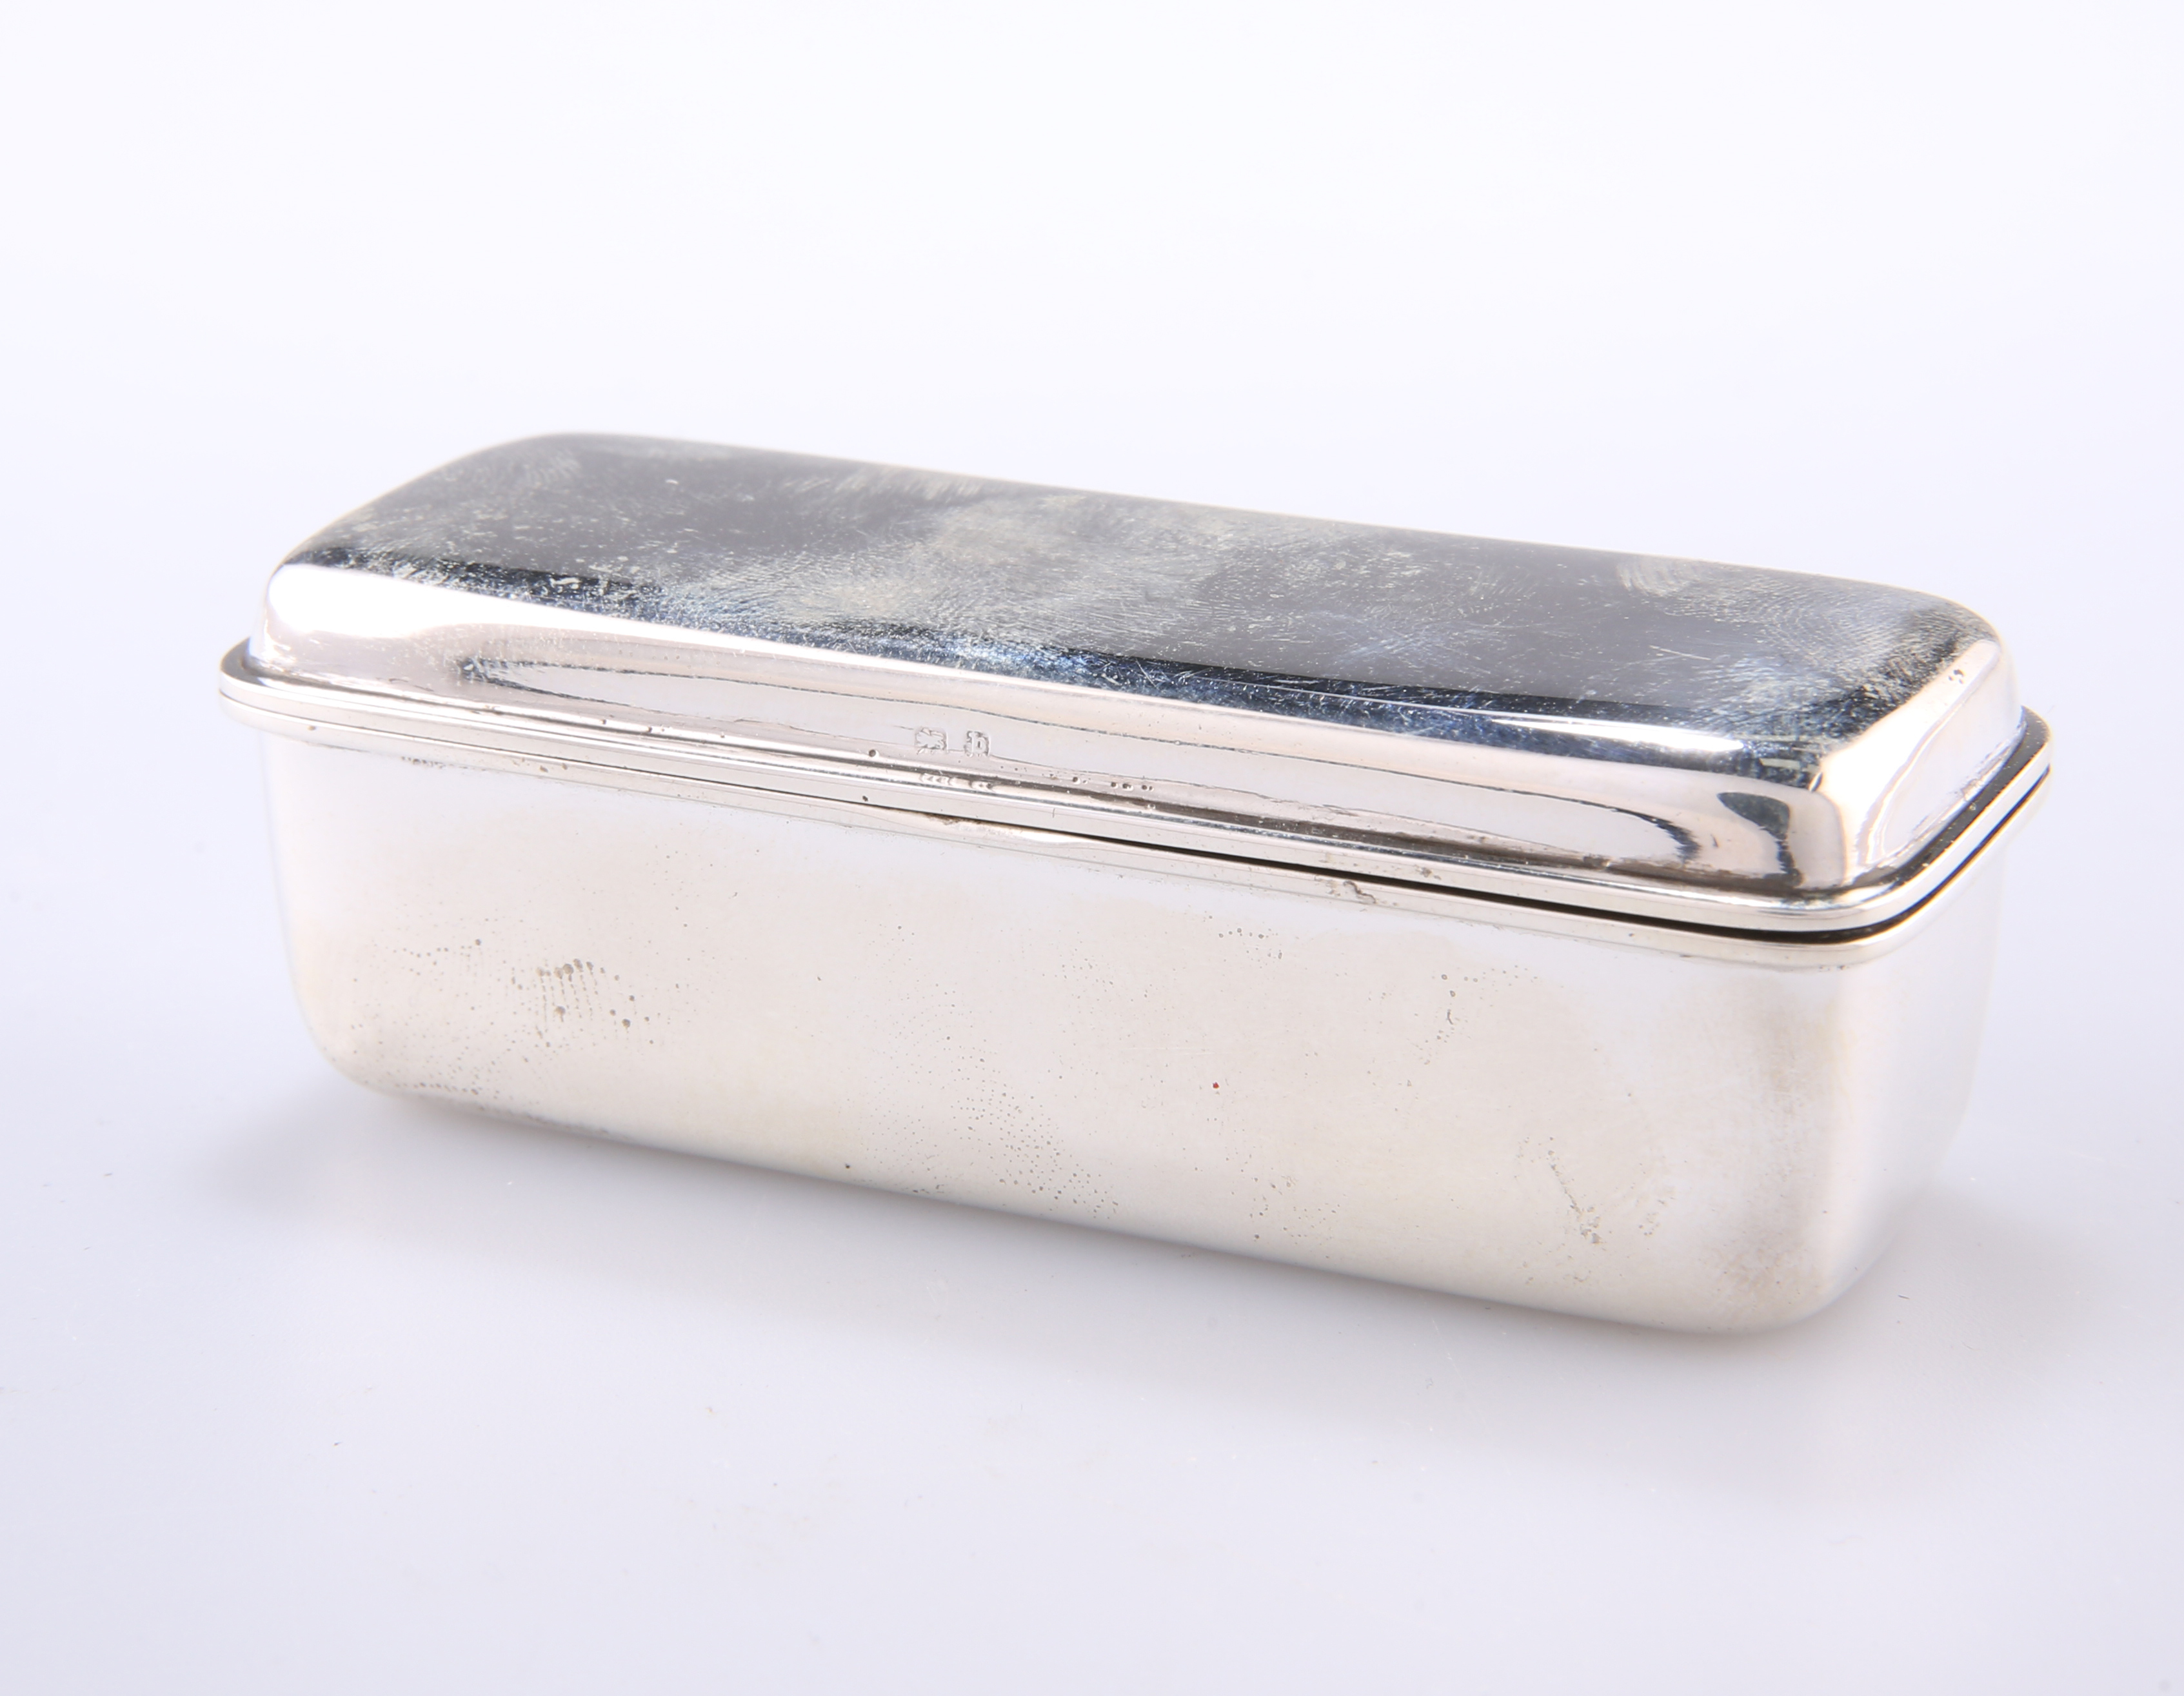 AN EDWARDIAN SILVER RING BOX, by Lawrence Emanuel, Birmingham 1901, of rectangular form with